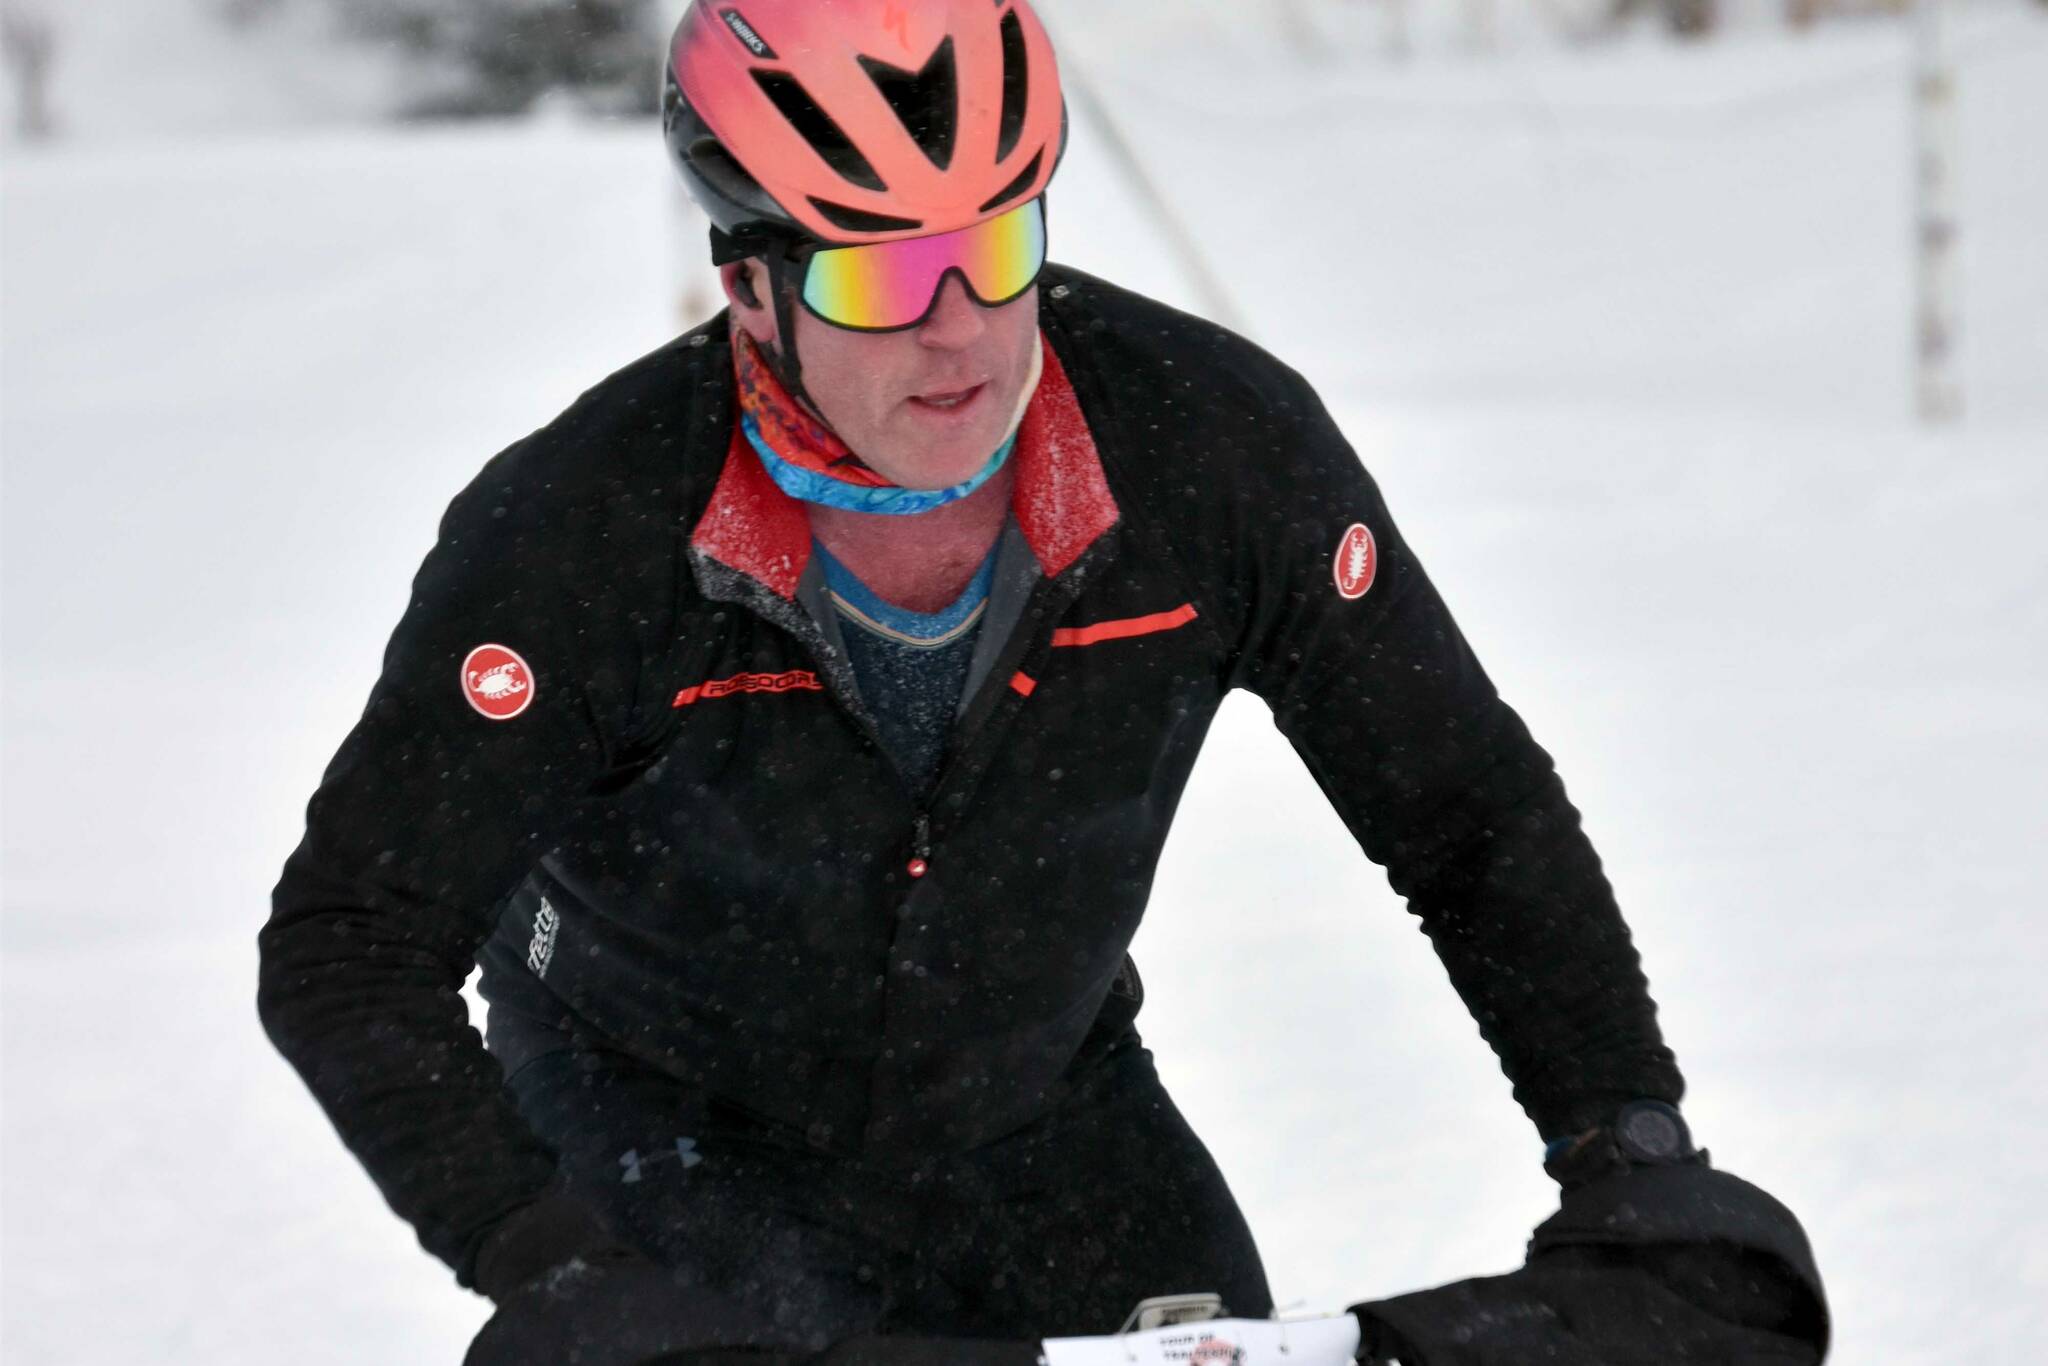 Eric Thomason finishes first in the men's 20-kilometer fat bike at the 6th Annual Tour of Tsalteshi on Sunday, Feb. 19, 2023, at Tsalteshi Trails just outside of Soldotna, Alaska. (Photo by Jeff Helminiak/Peninsula Clarion)